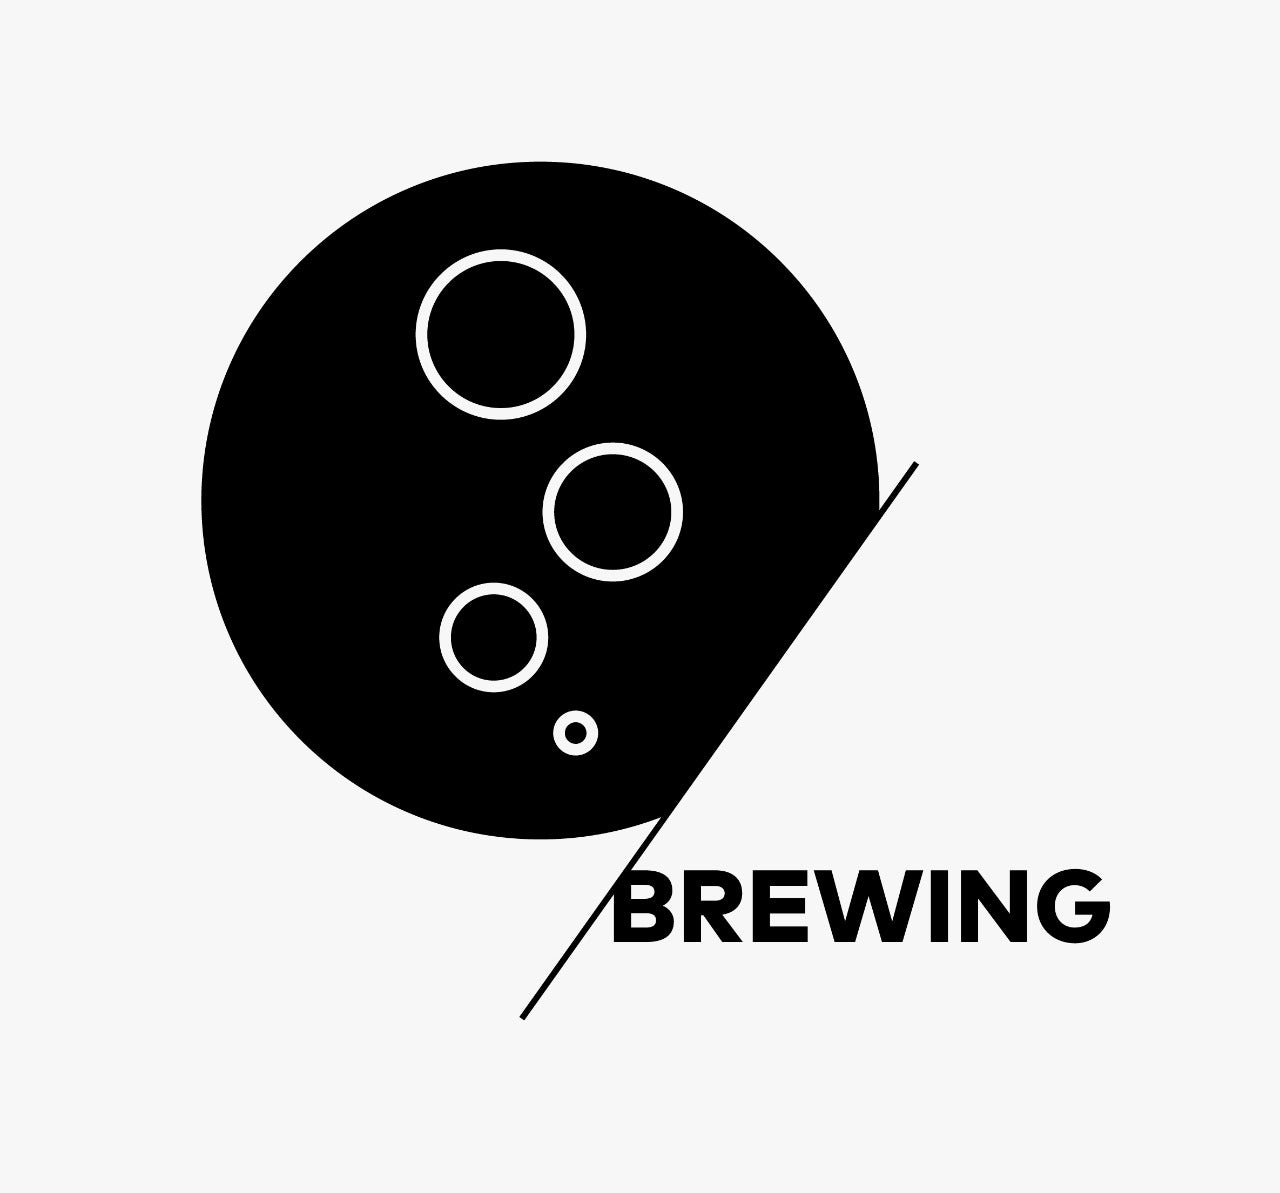 Brewing Professional